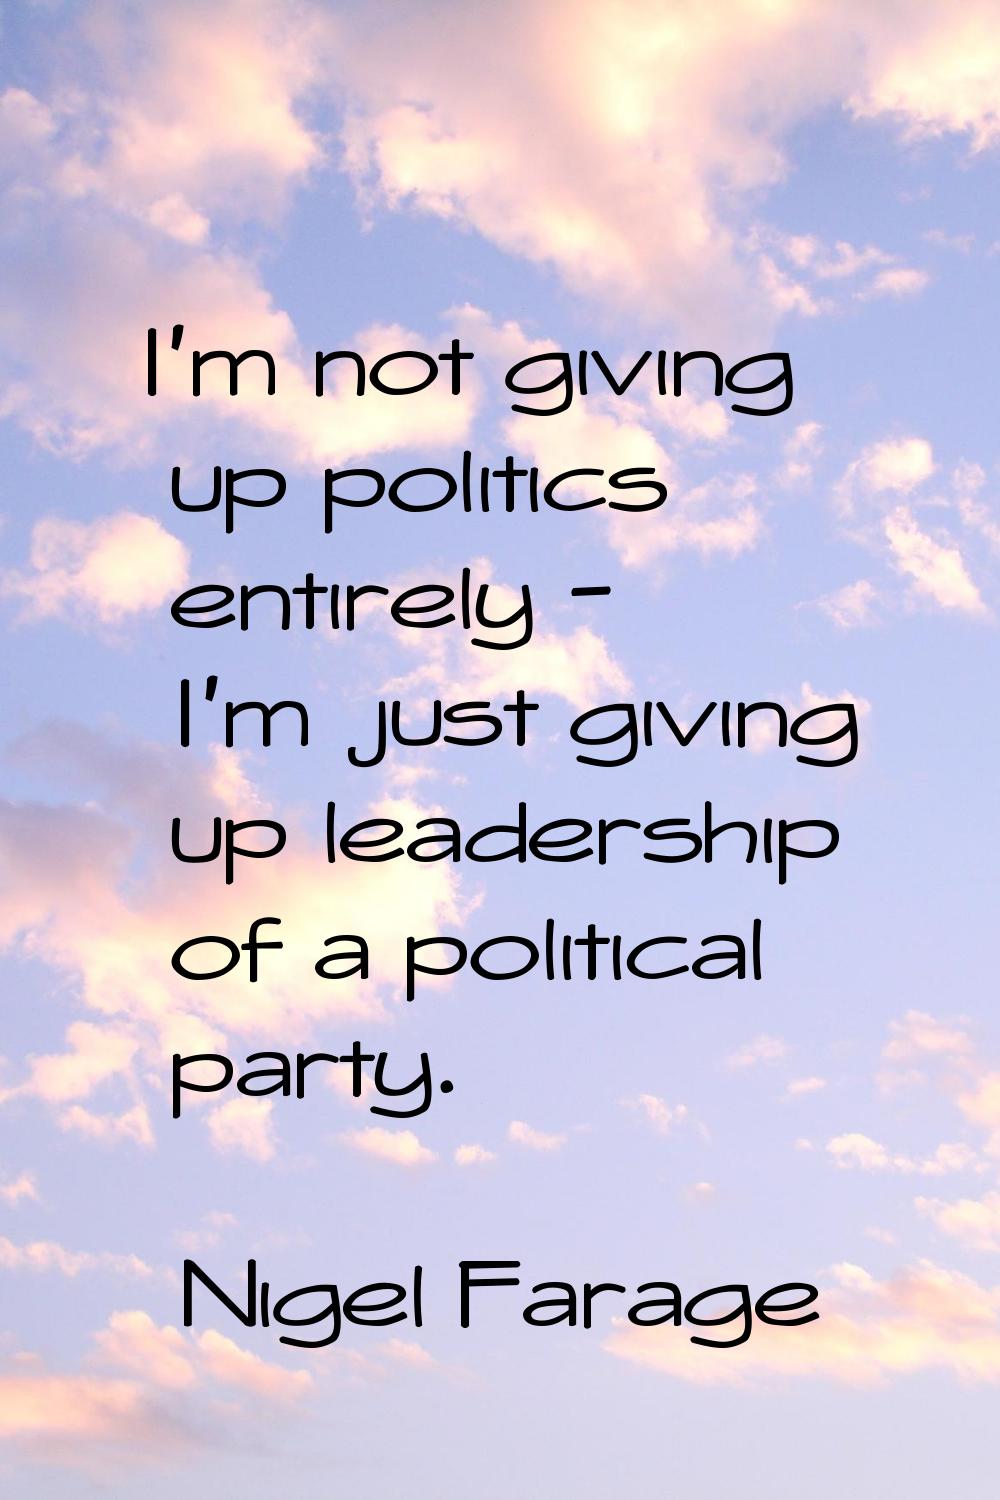 I'm not giving up politics entirely - I'm just giving up leadership of a political party.